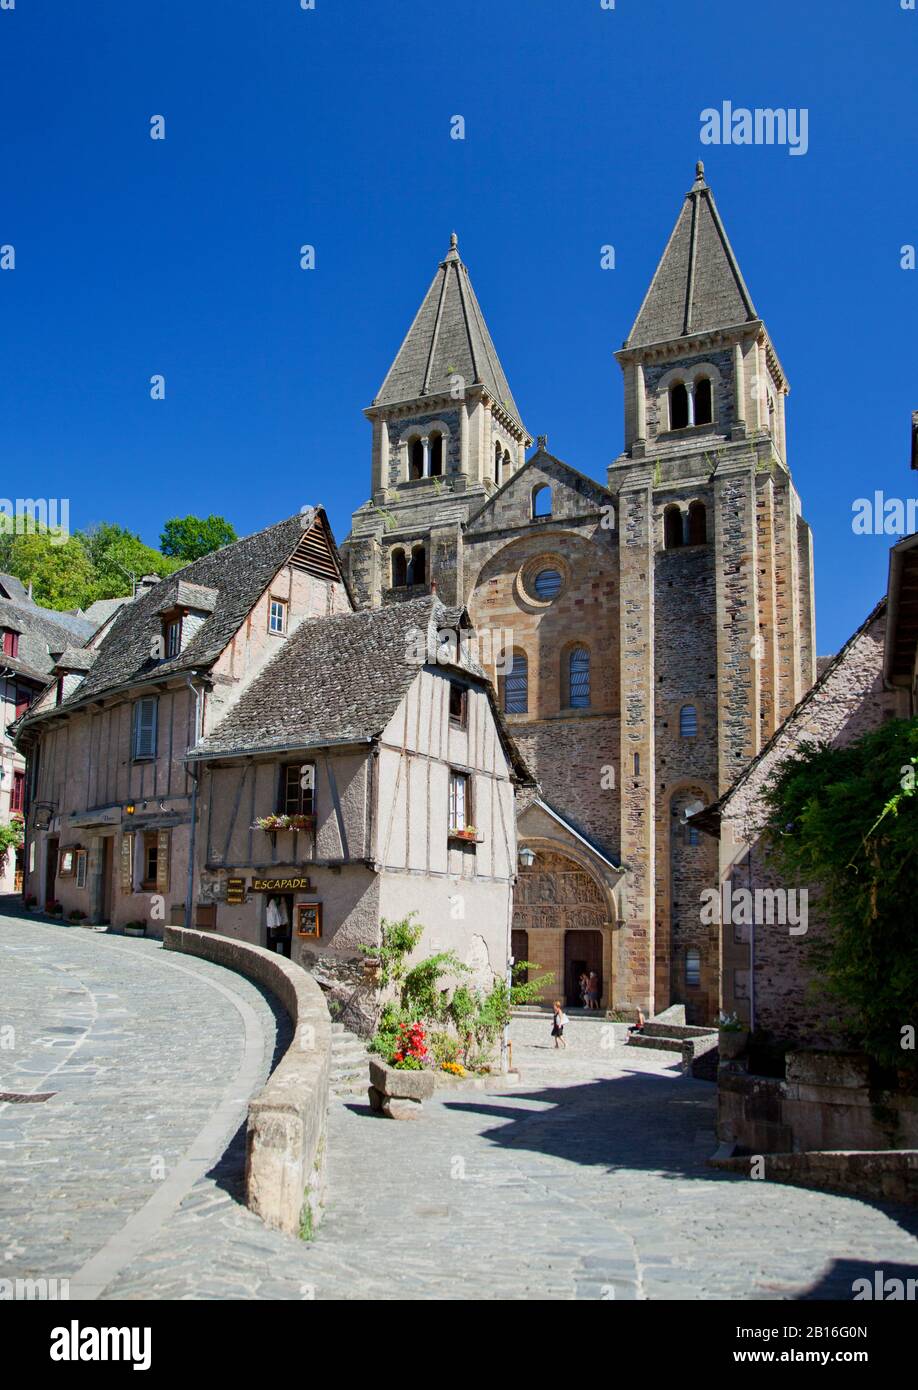 Conques, Aveyron, France, Europe Banque D'Images